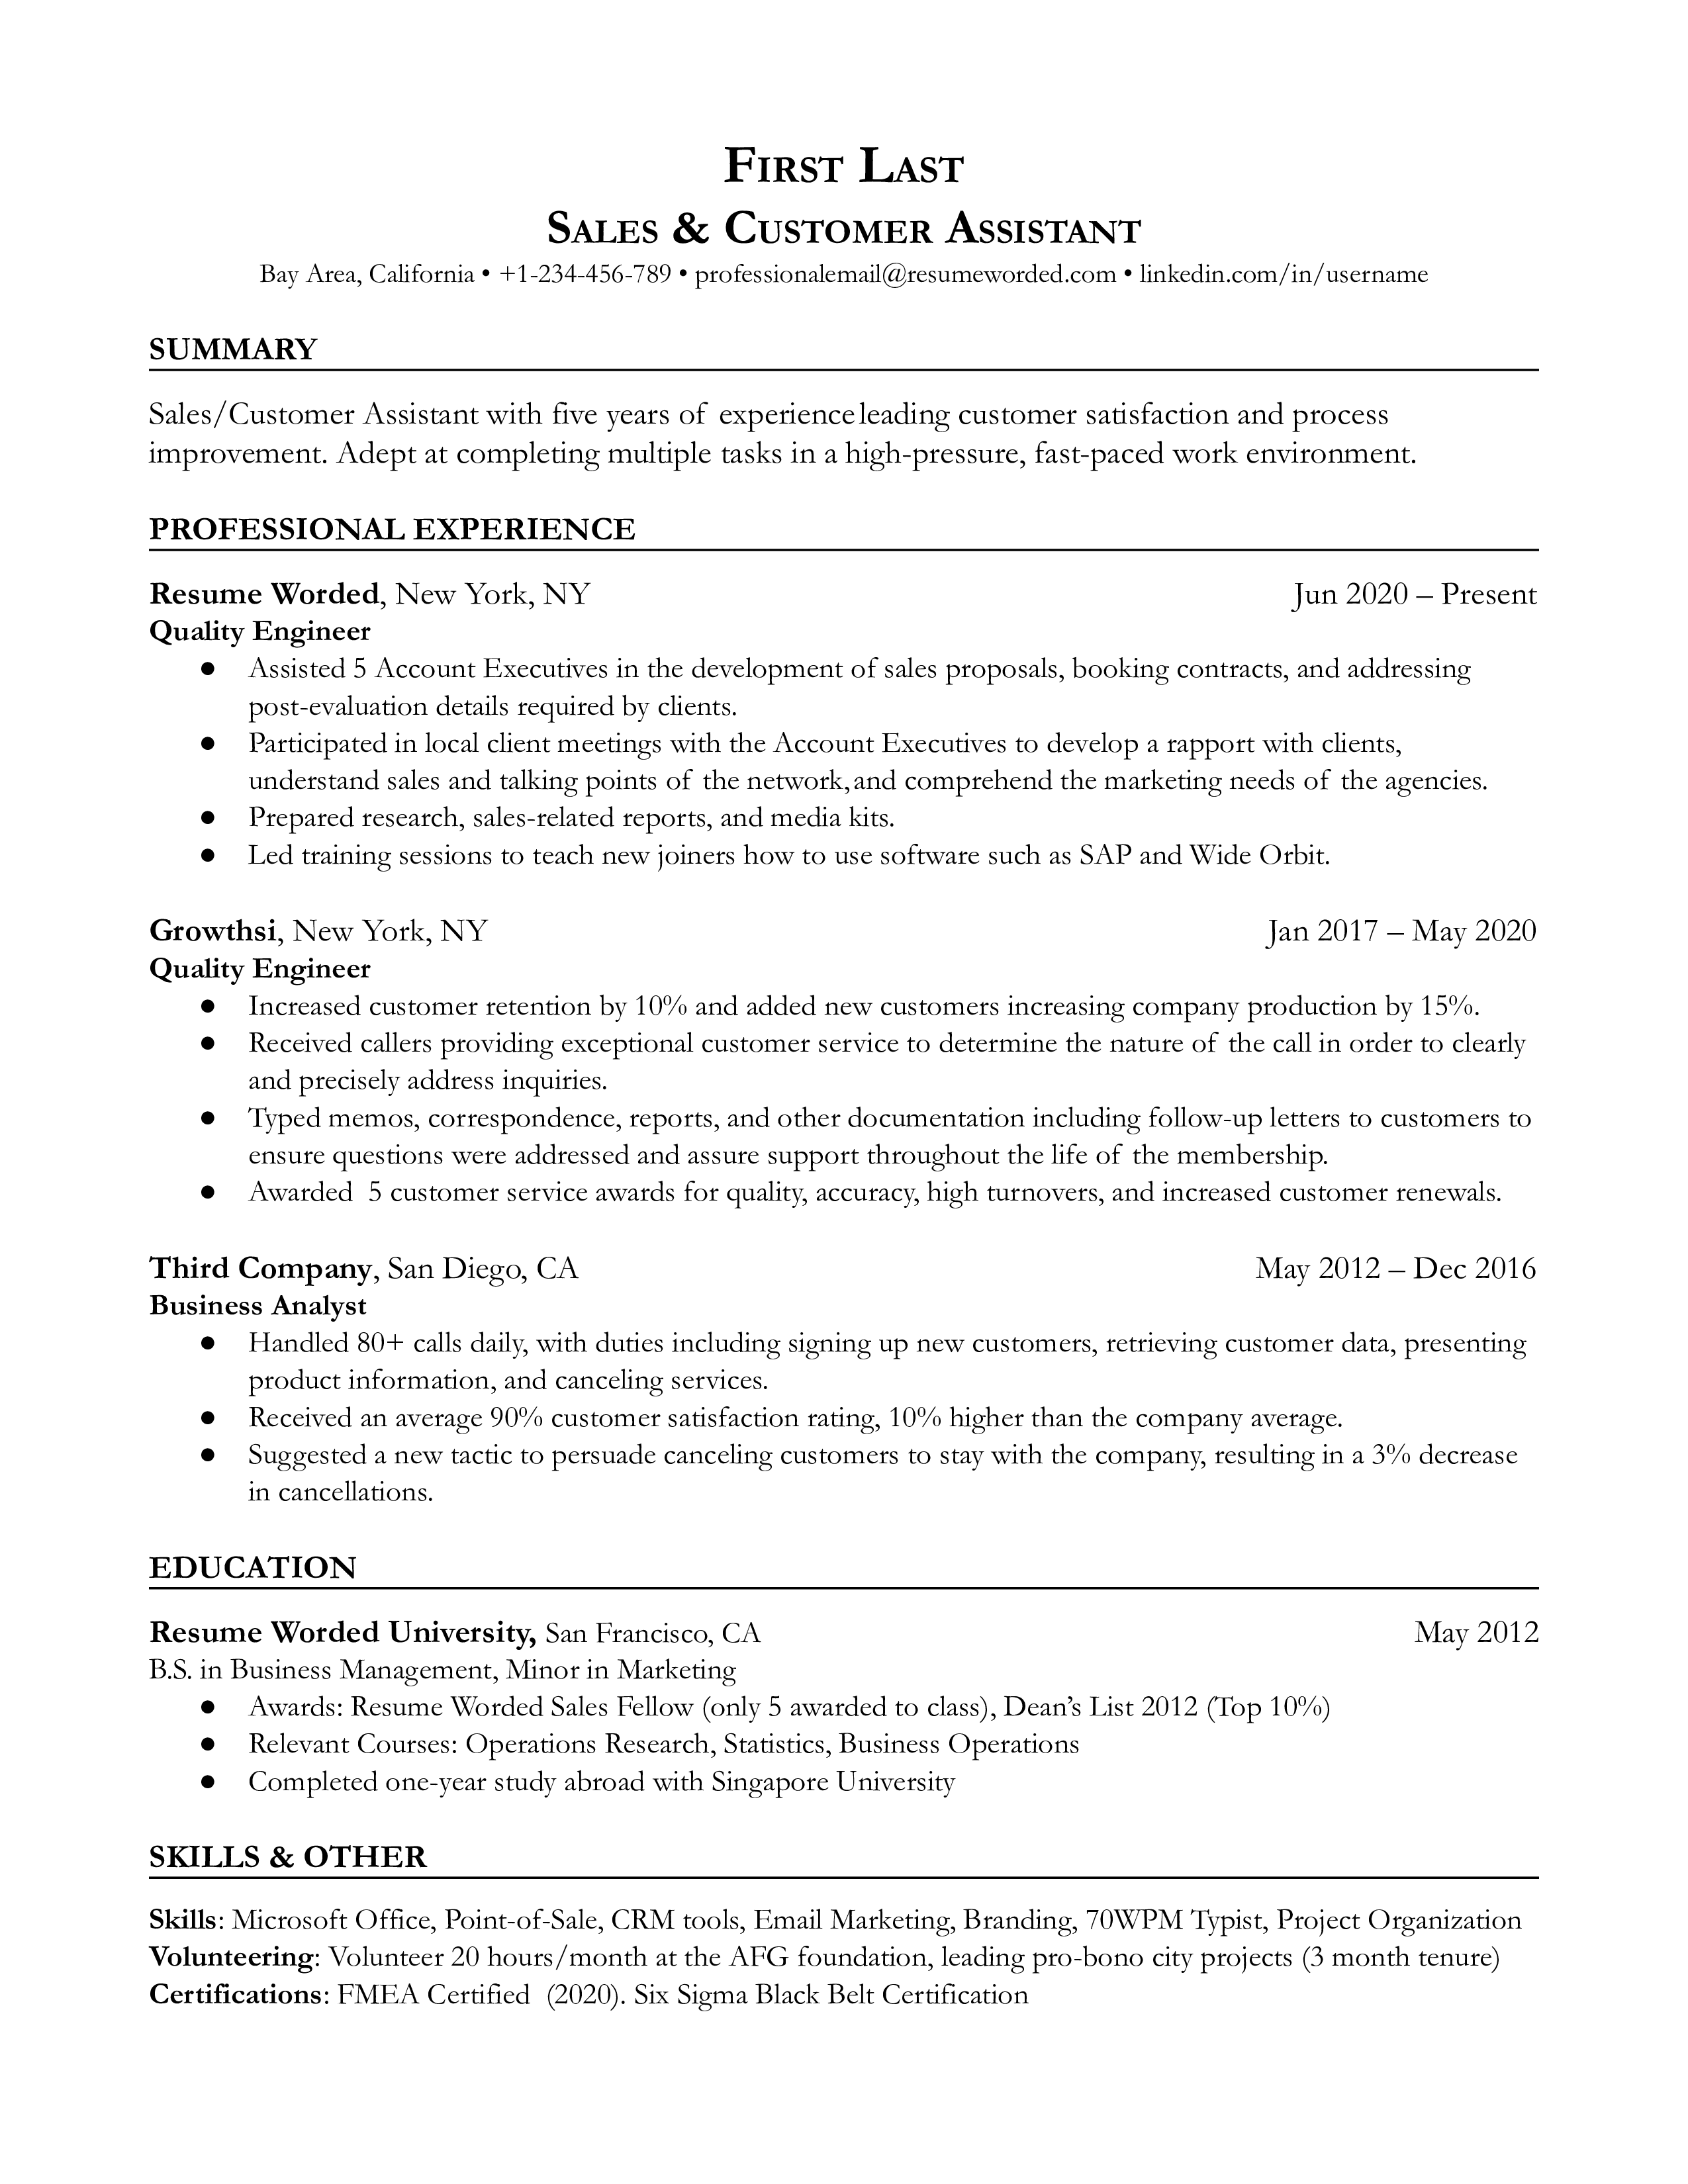 Close-up view of a well-structured CV for a Sales/Customer Assistant role.